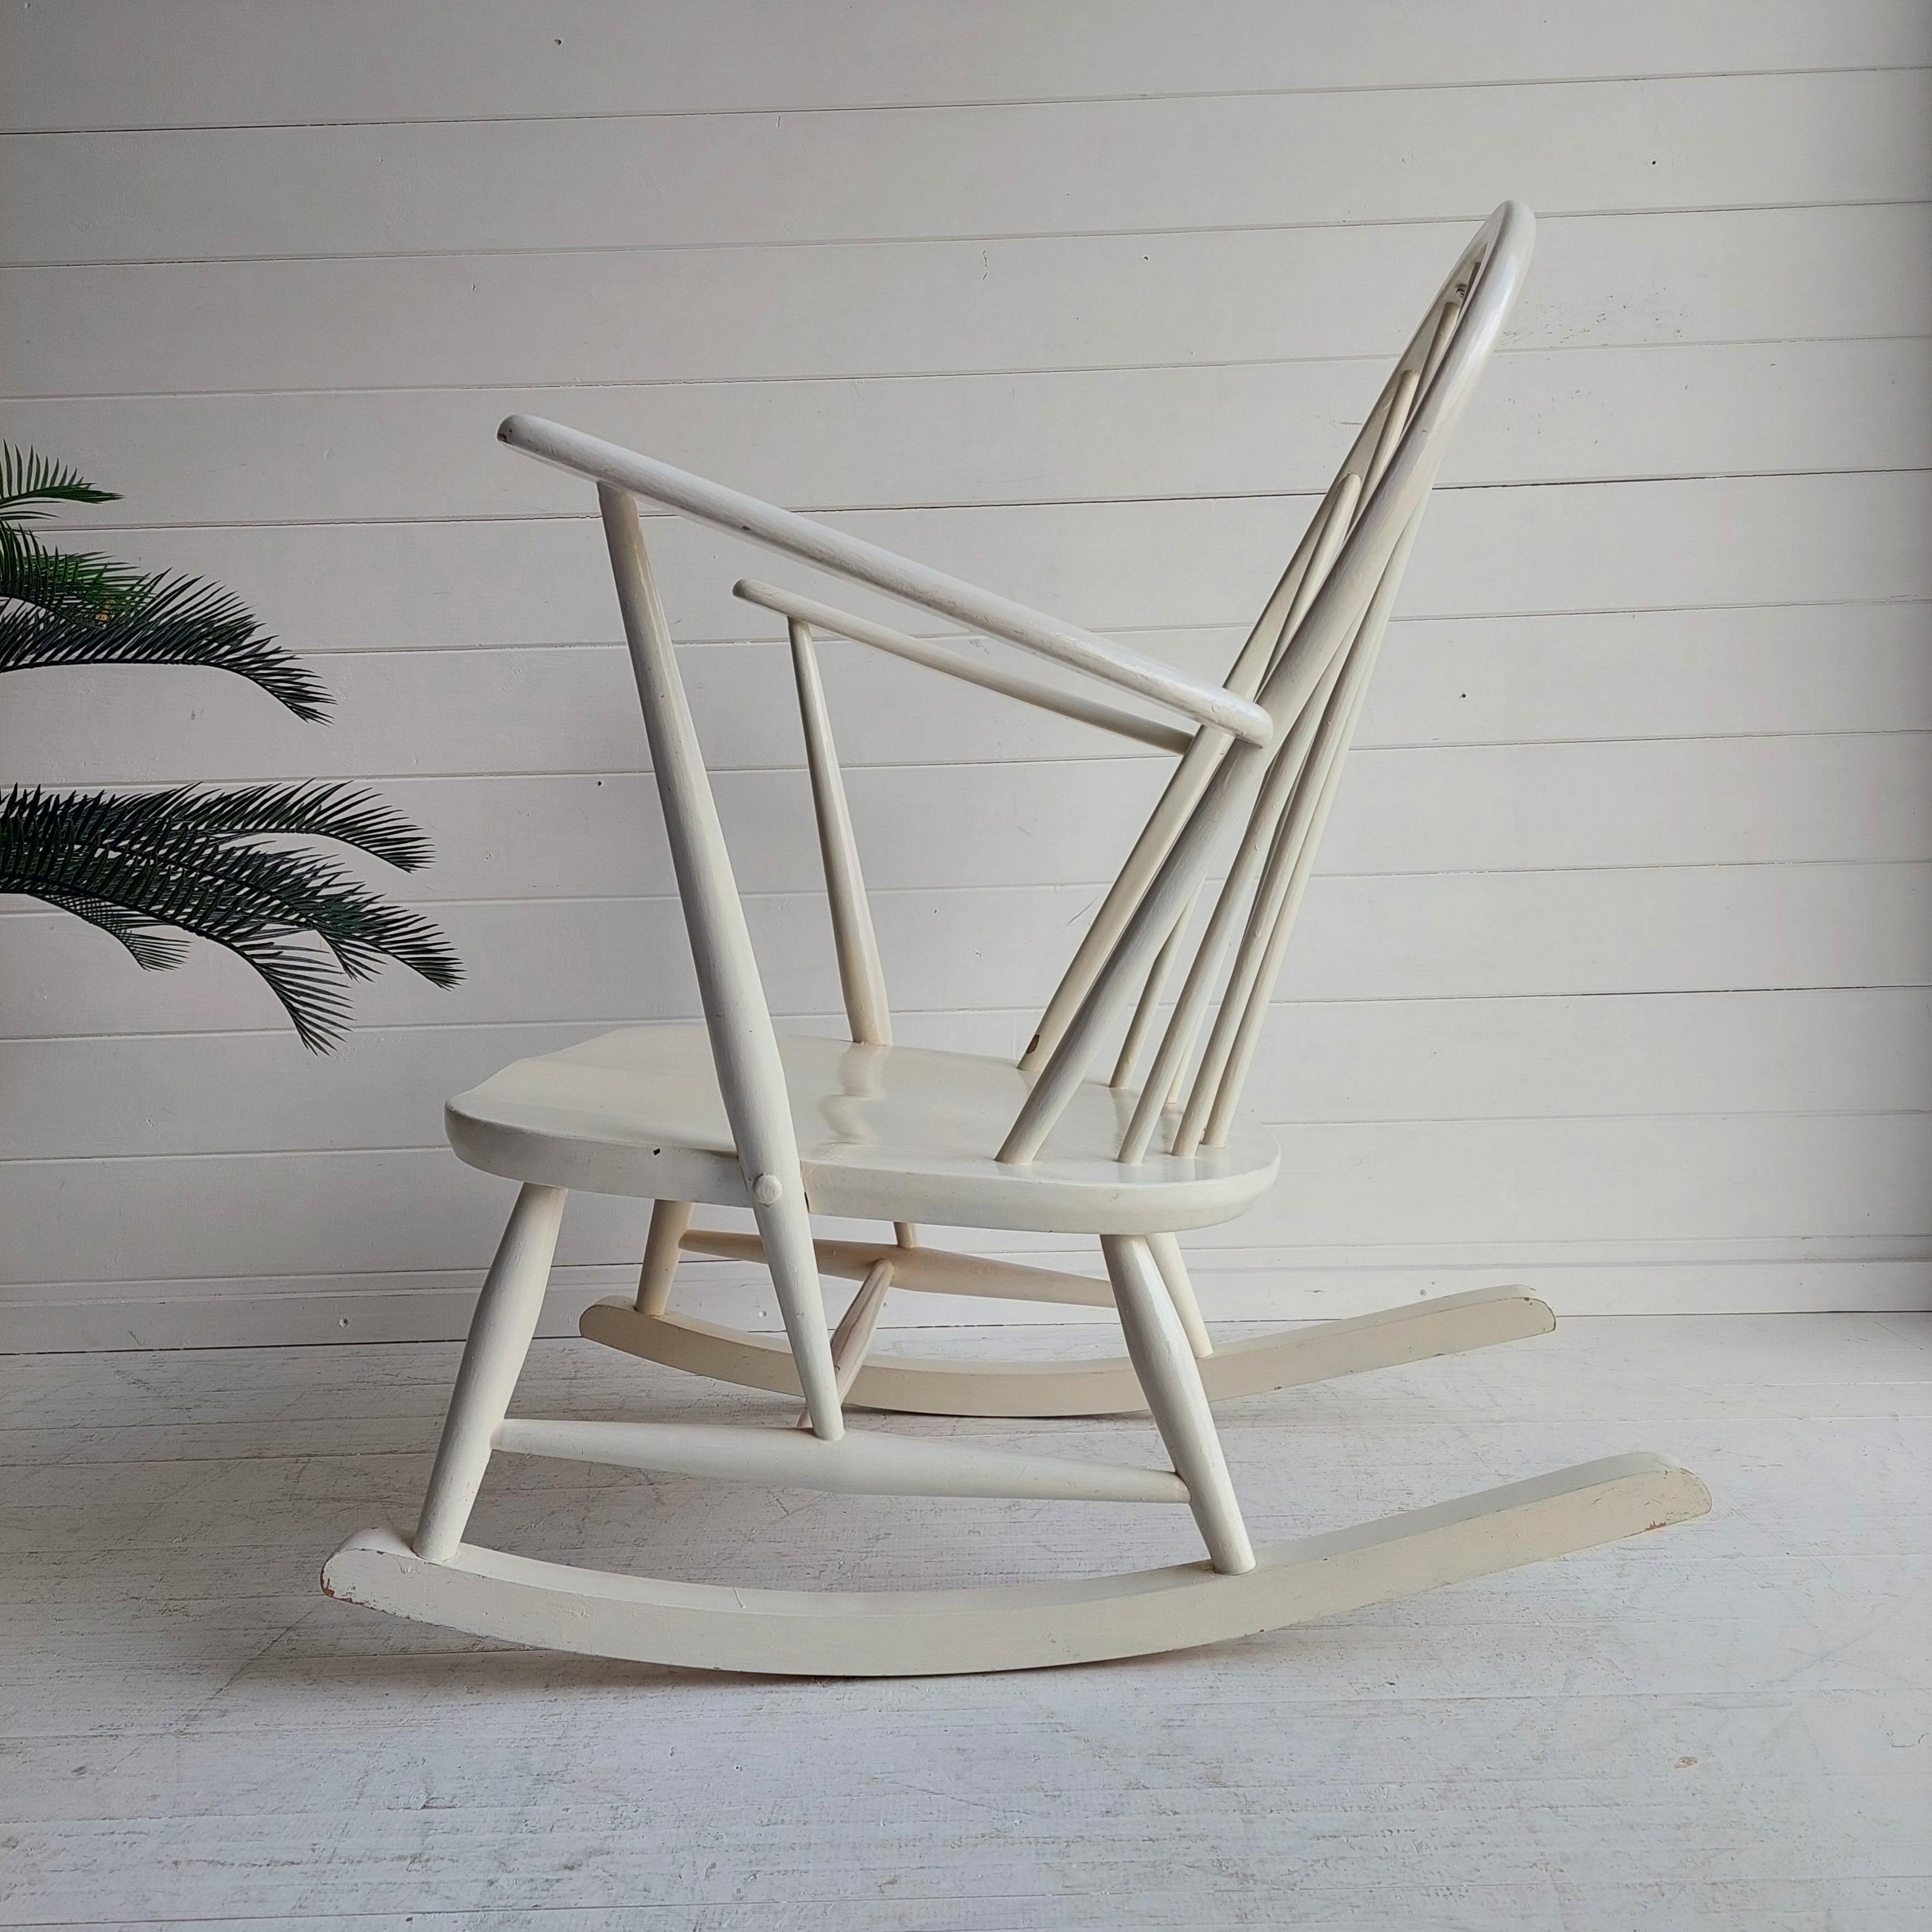 British Midcentury No 470 Windsor Rocking Chair by Lucian Ercolani for Ercol, 1960s